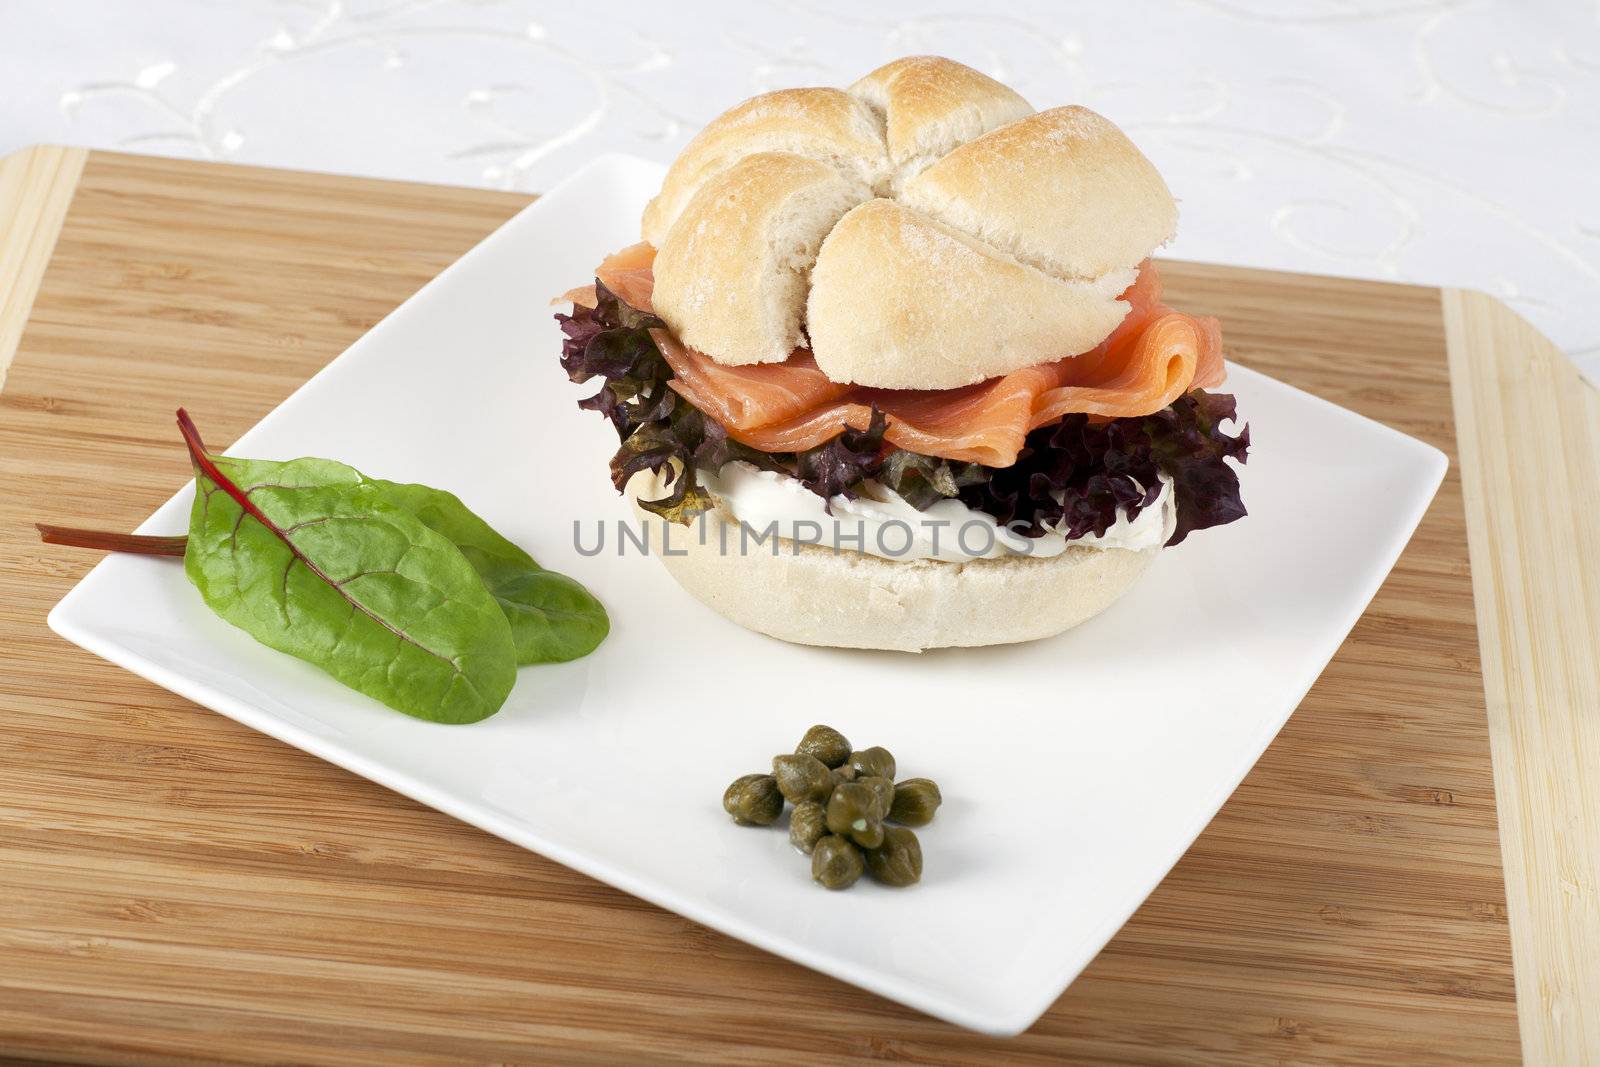 Smoked salmon and cream cheese on roll with capers.